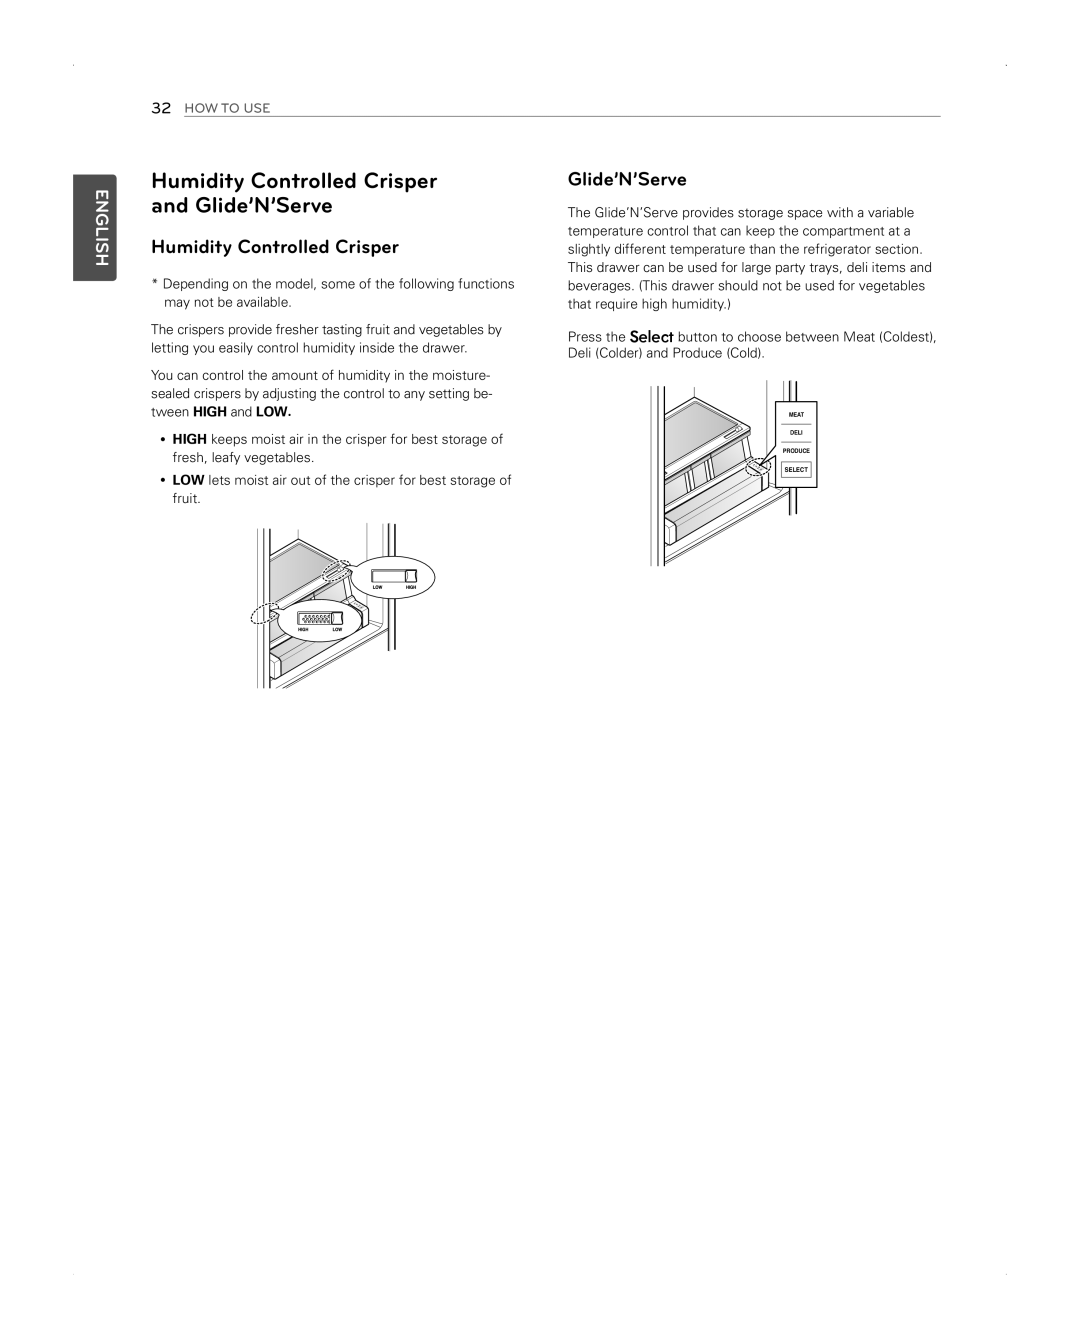 LG Electronics LFX31945ST owner manual Humidity Controlled Crisper and Glide’N’Serve, English, How To Use 